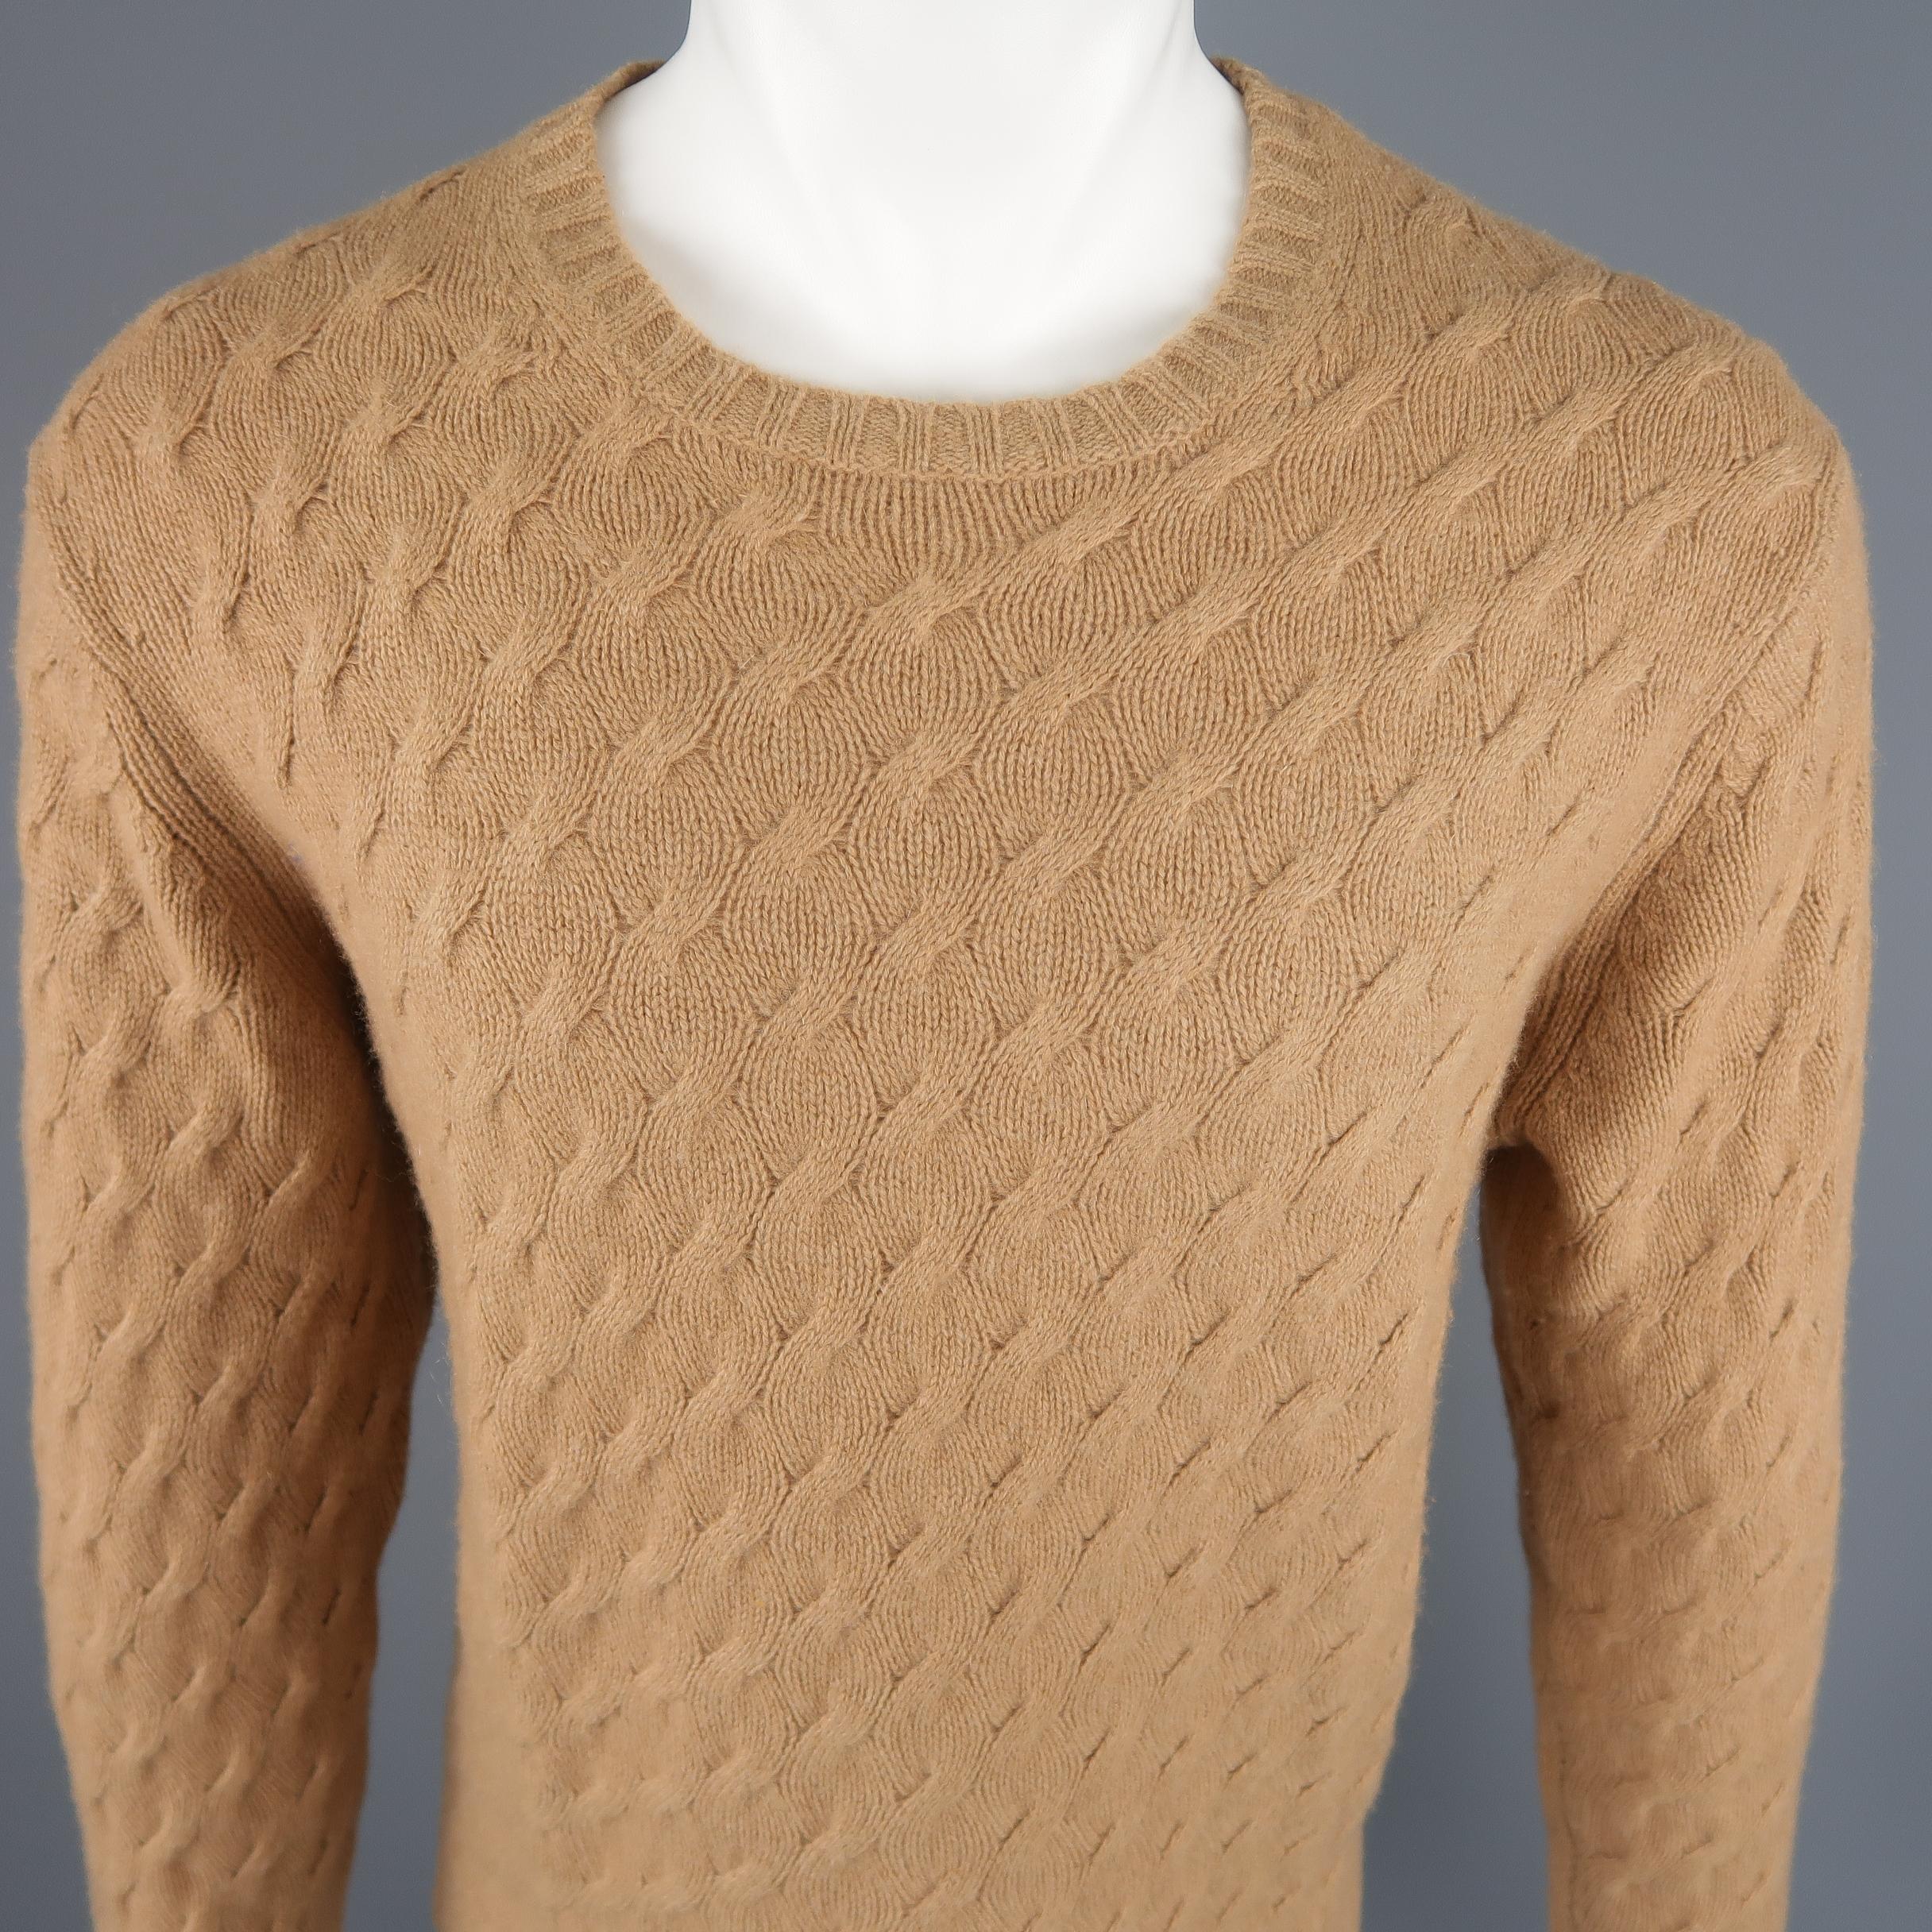 Tasso Elba  Size L  sweater come in 100% Cashmere in a tan tone cable knit, with a crewneck and ribbed cuff and waistband.
 
Excellent  Pre-Owned Condition.
Marked: L
 
Measurements:
 
Shoulder: 19 in.
Chest: 23 in.
Sleeve: 27 in.
Length: 27 in.